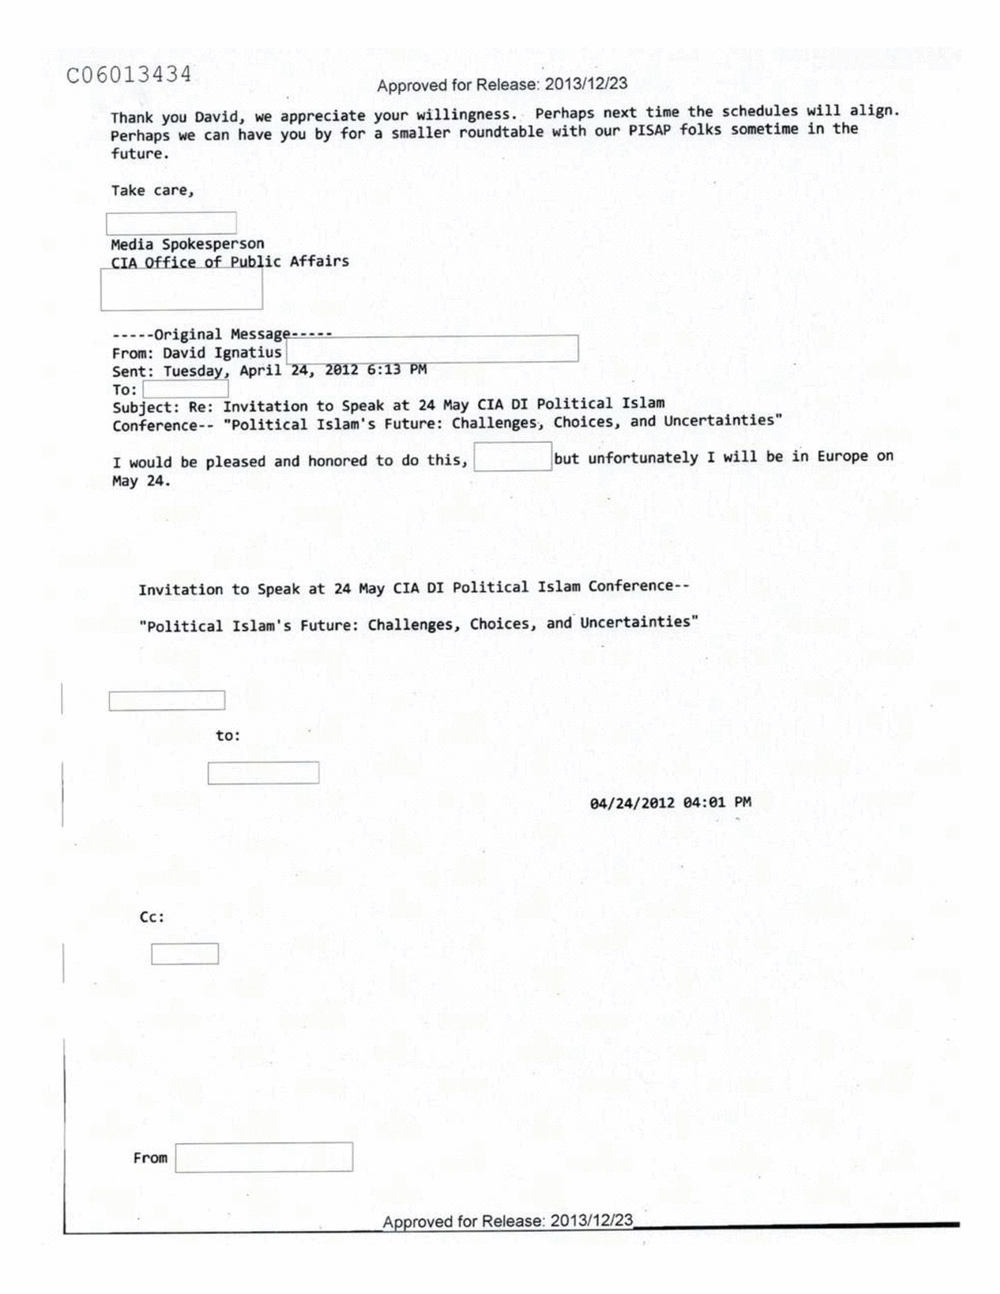 Page 295 from Email Correspondence Between Reporters and CIA Flacks